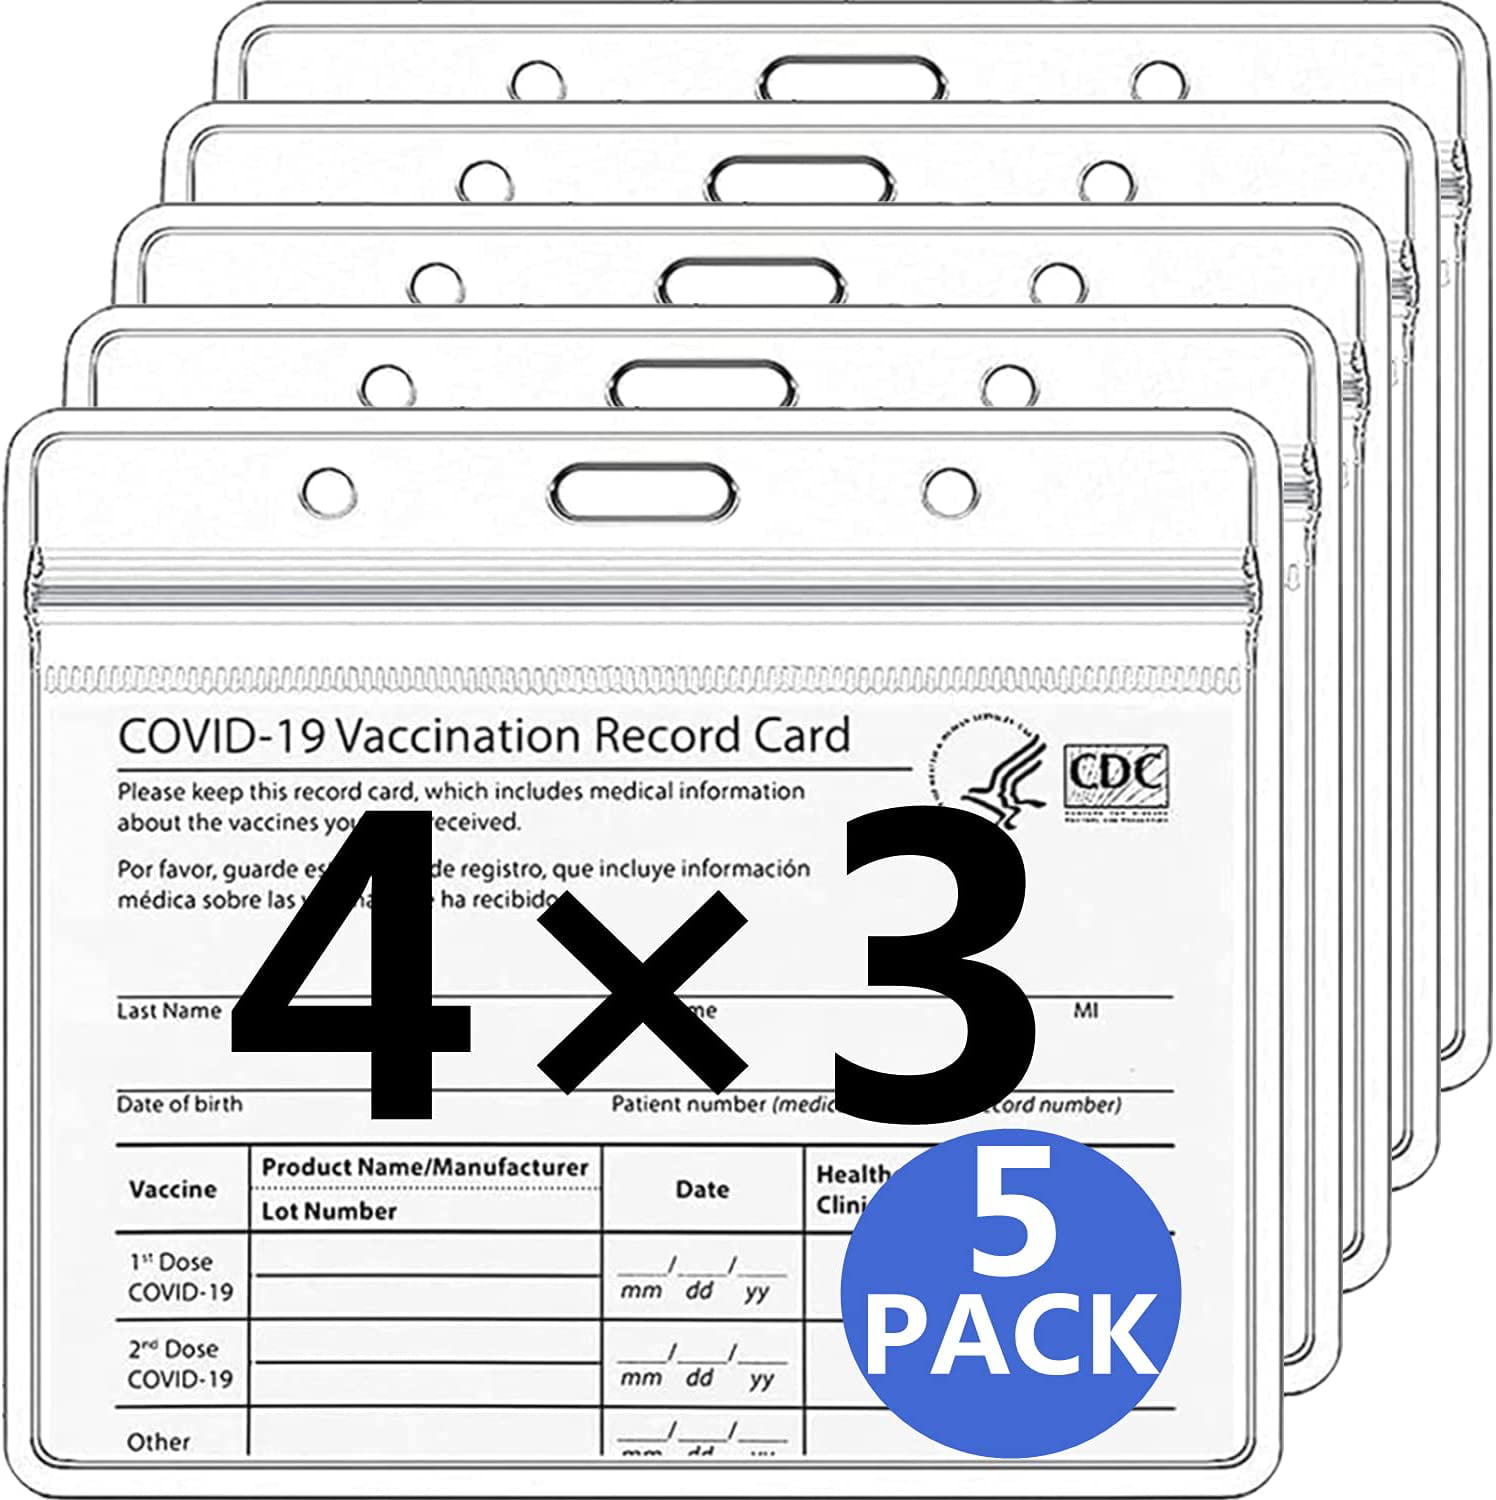 4x3 Immunization Record Vaccination Card Protector for CDC Horizontal Badge Cover Holder Clear Vinyl Plastic Sleeve with Waterproof Type Resealable Zip 3 Pack CDC Vaccine Card Protector